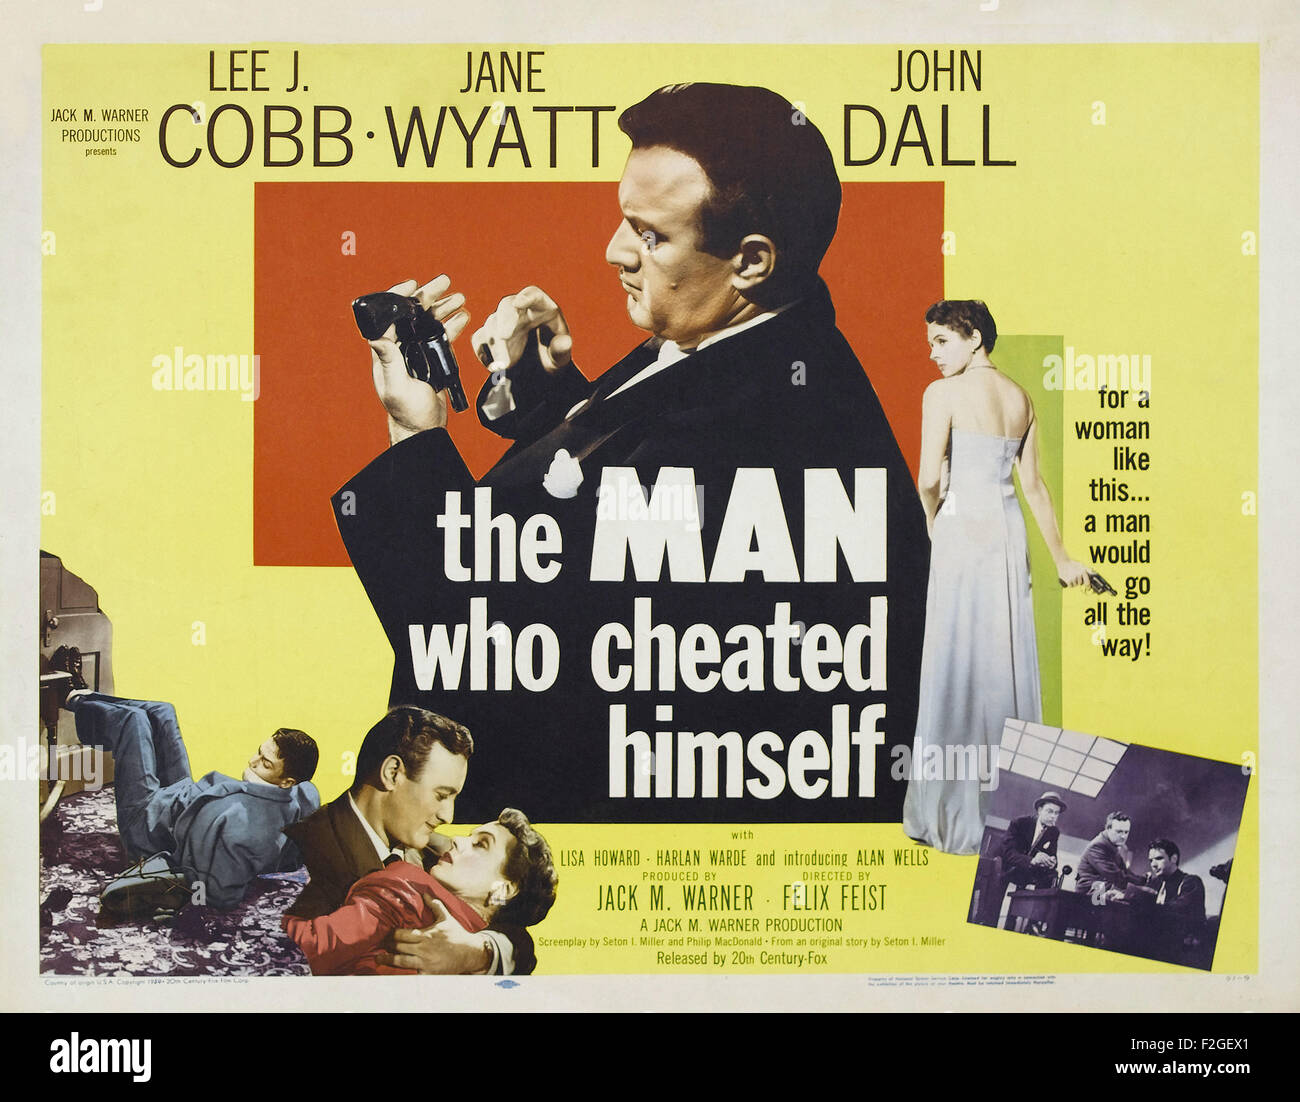 Man Who Cheated Himself, The 01 - Movie Poster Stock Photo